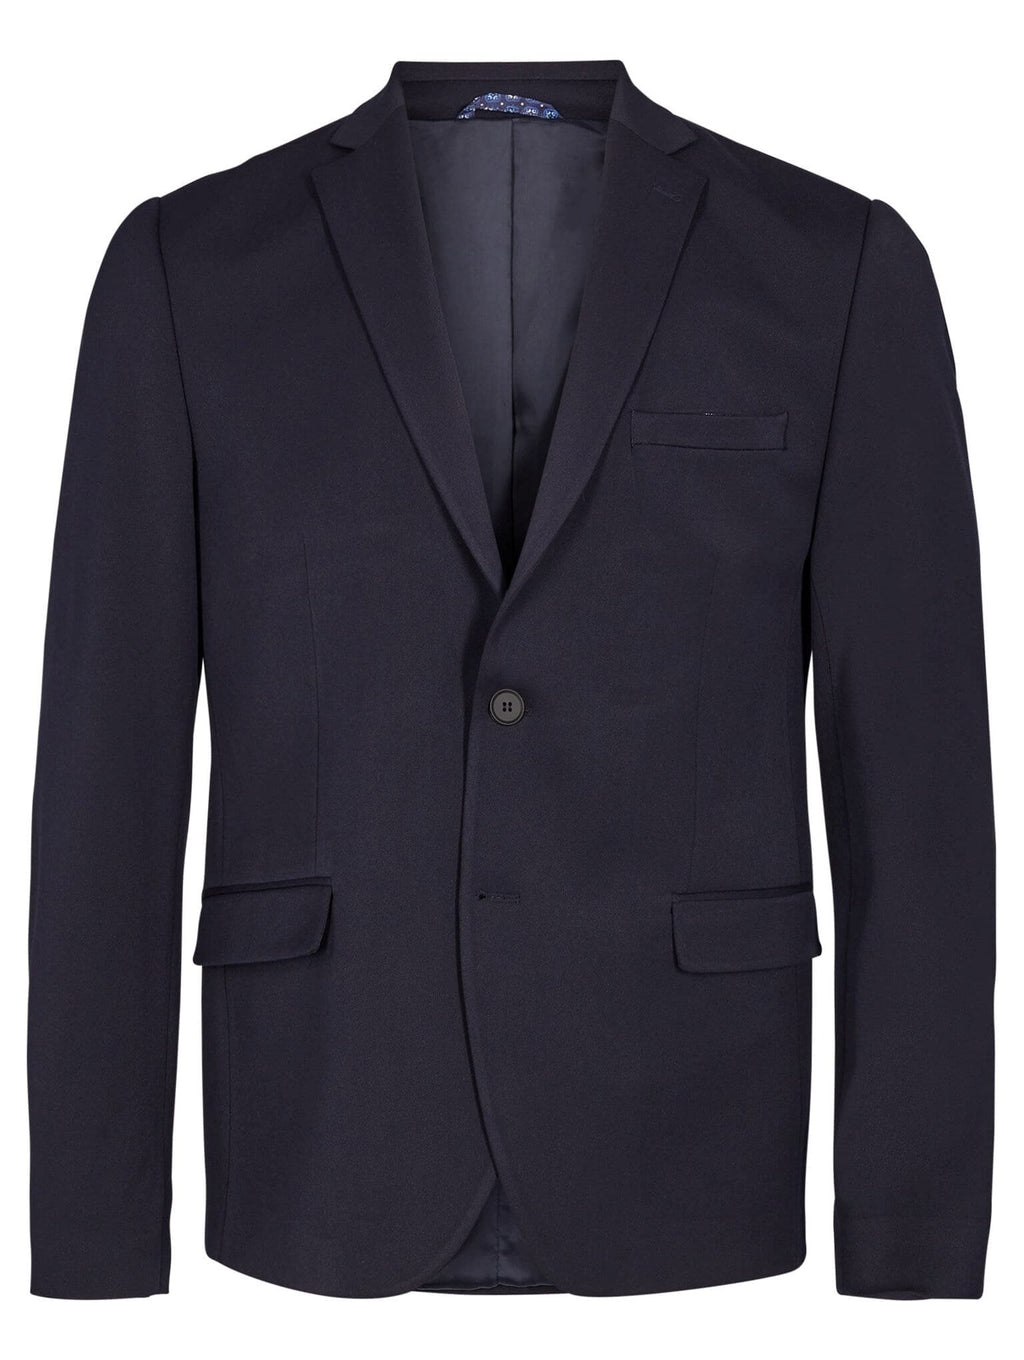 Frederic Suit Jack - Navy